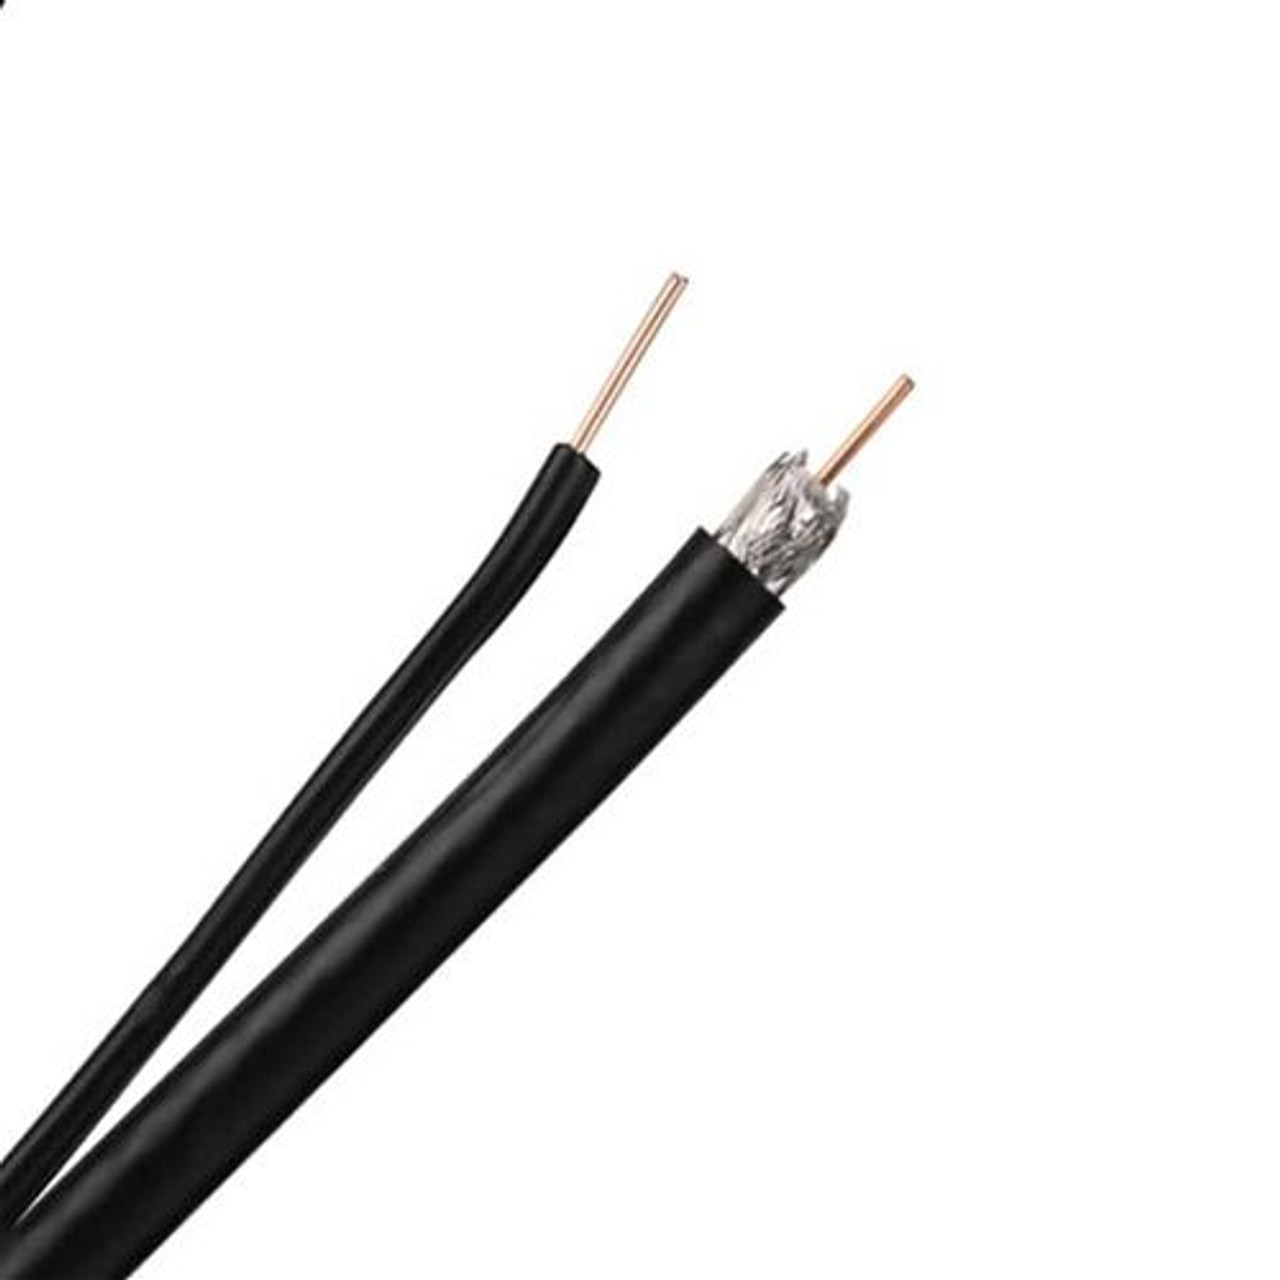 DirecTV RG6 Coaxial Cable 3GHz Solid Copper Black with Ground Wire 18 AWG UL Listed Satellite Digital HDTV CATV Bulk RG-6 Outdoor Suspension Drop Video Signal Cable